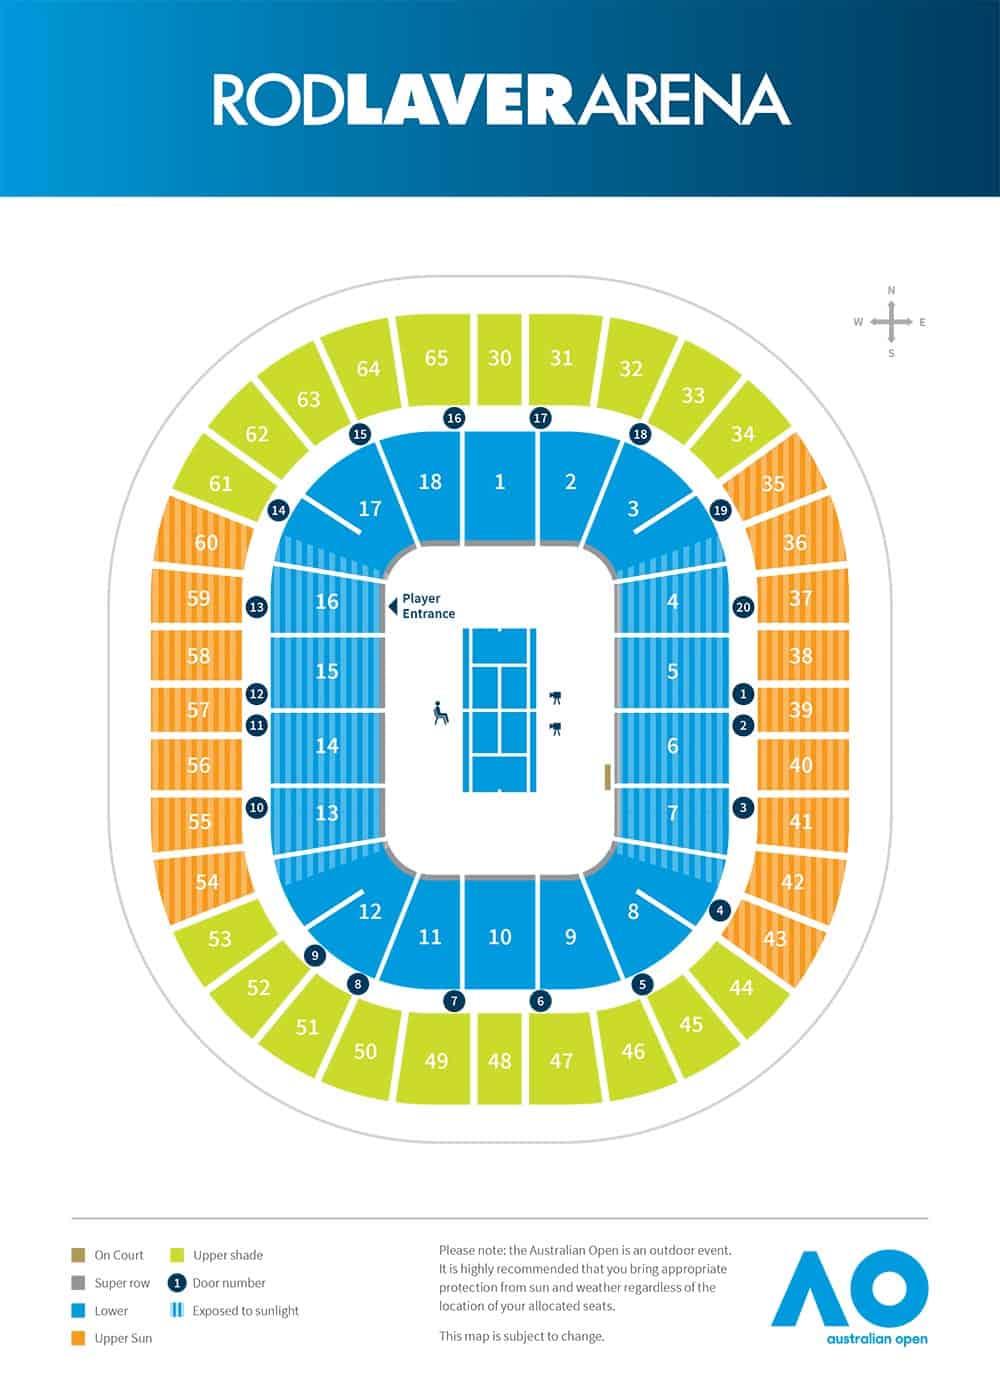 Rod Laver Arena Seating Map 2020